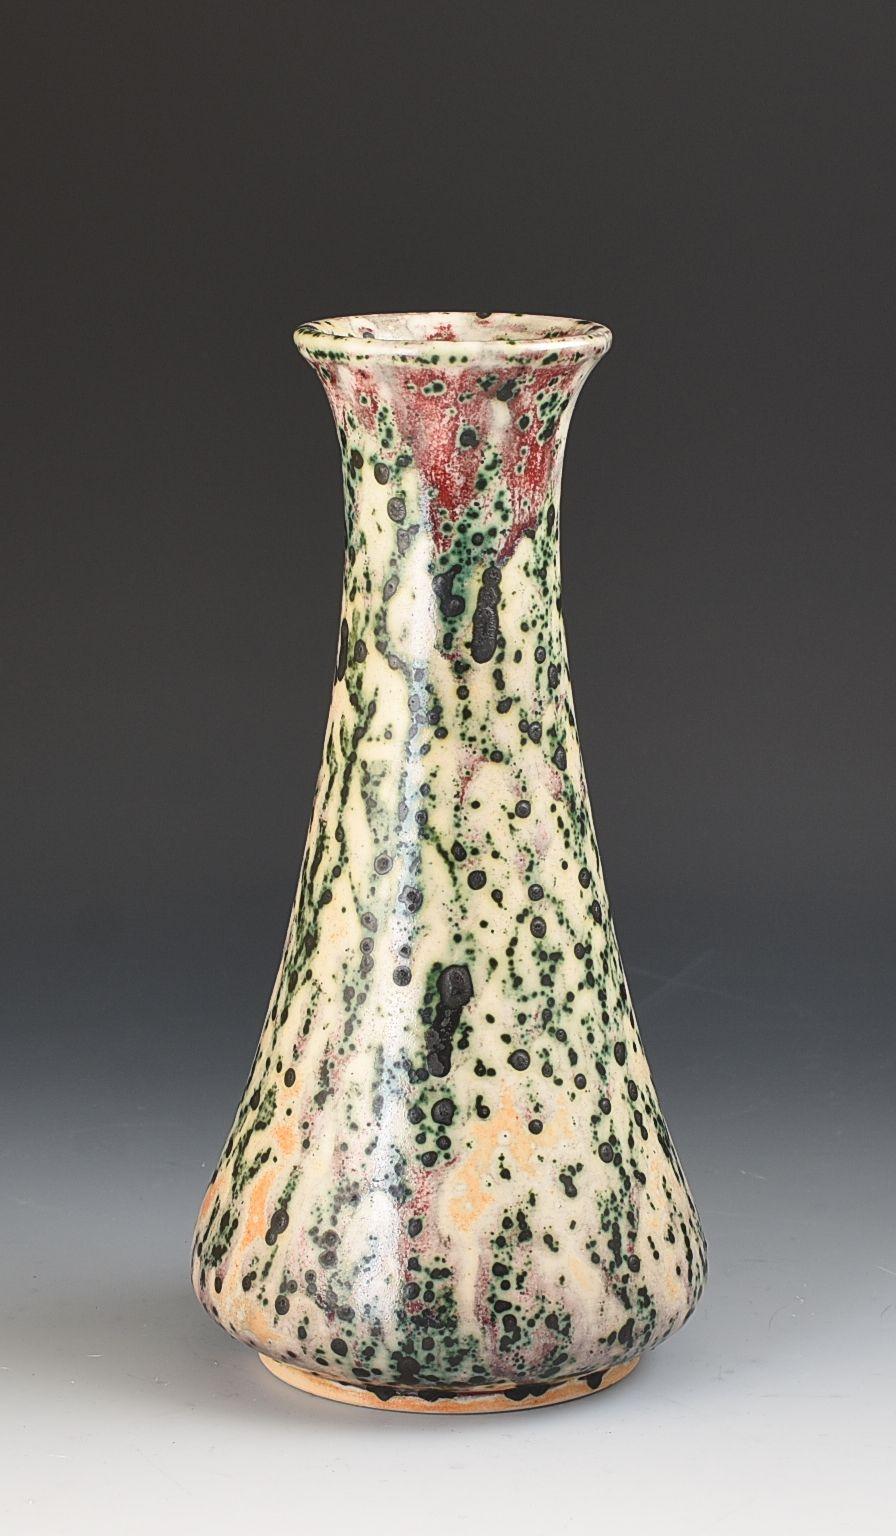 A superb spotted high fired vase showing a cream ground with purple, green and ochre spotting. Evenly fired and displays superbly all around. The vase measures 23.5cm in overall height, is GUARANTEED to be free from damage or restoration and carries